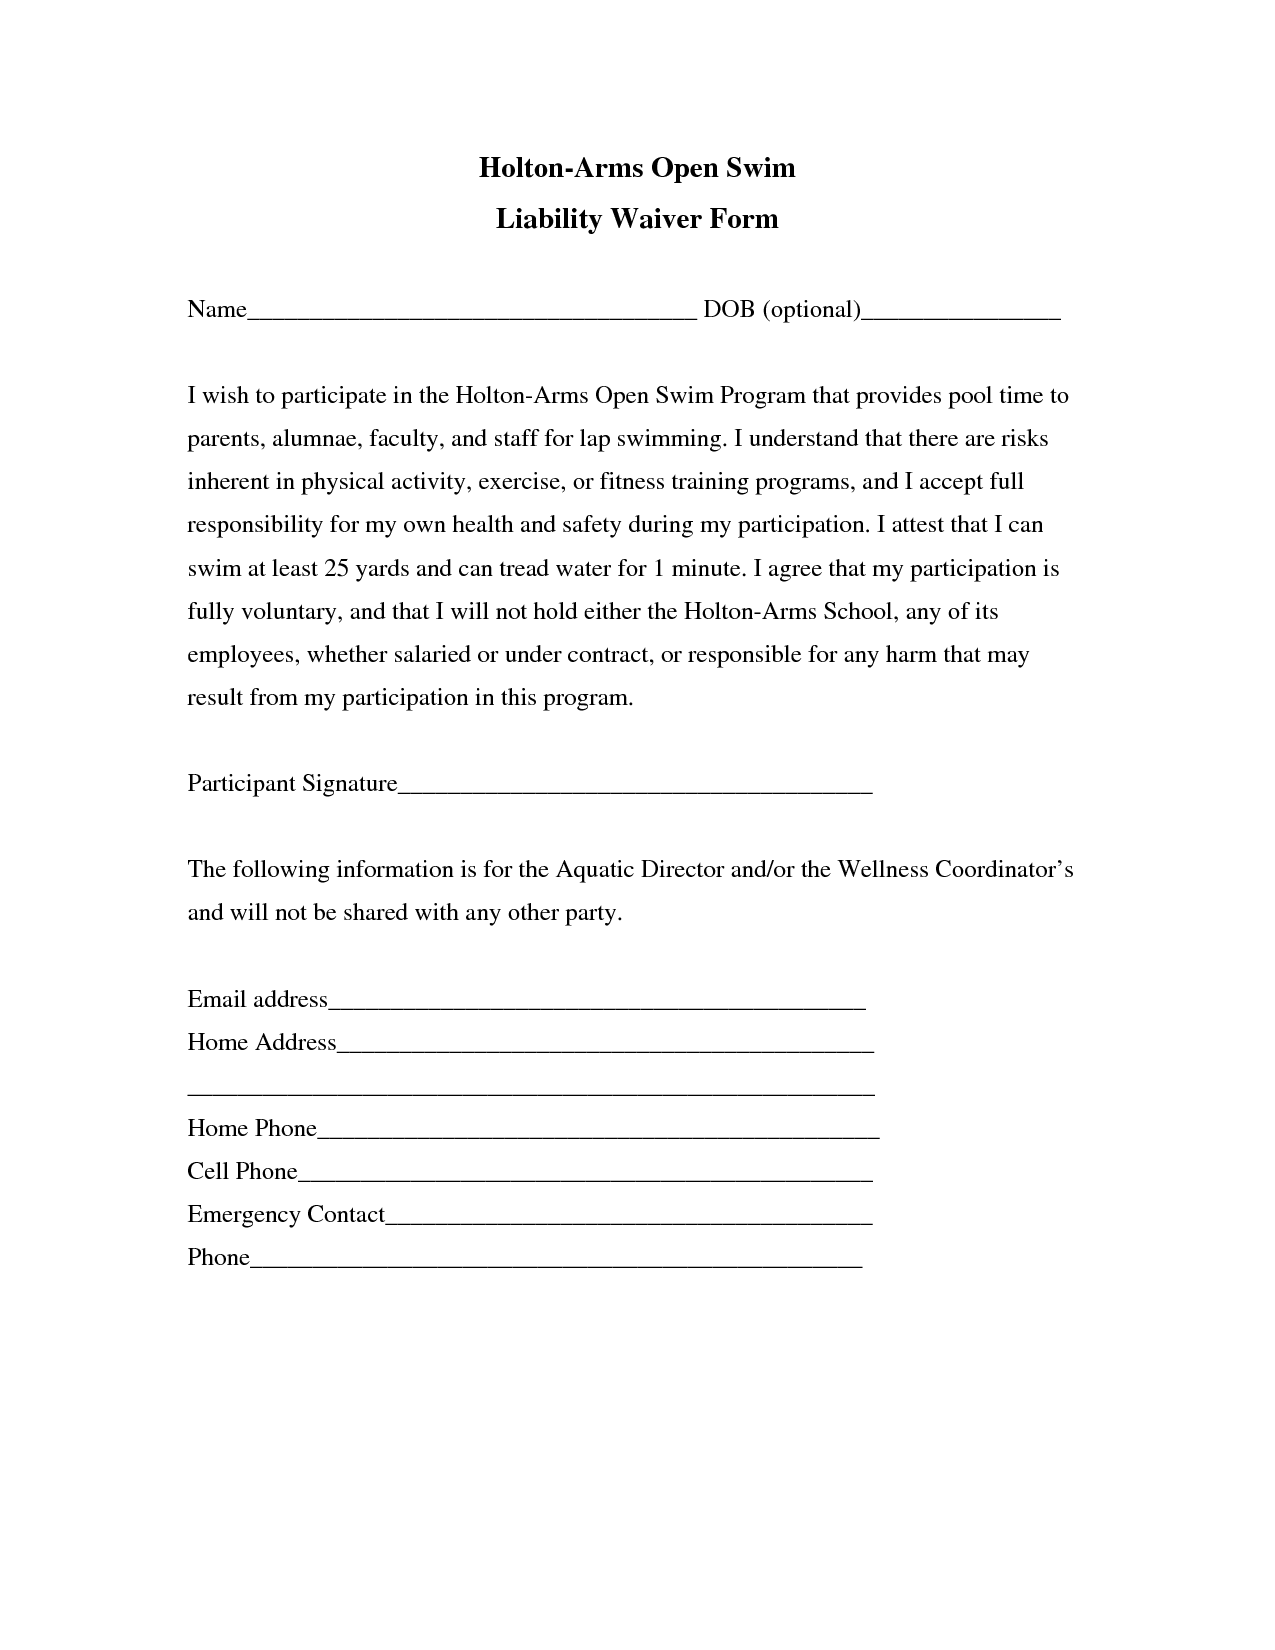 liability-waiver-form-template